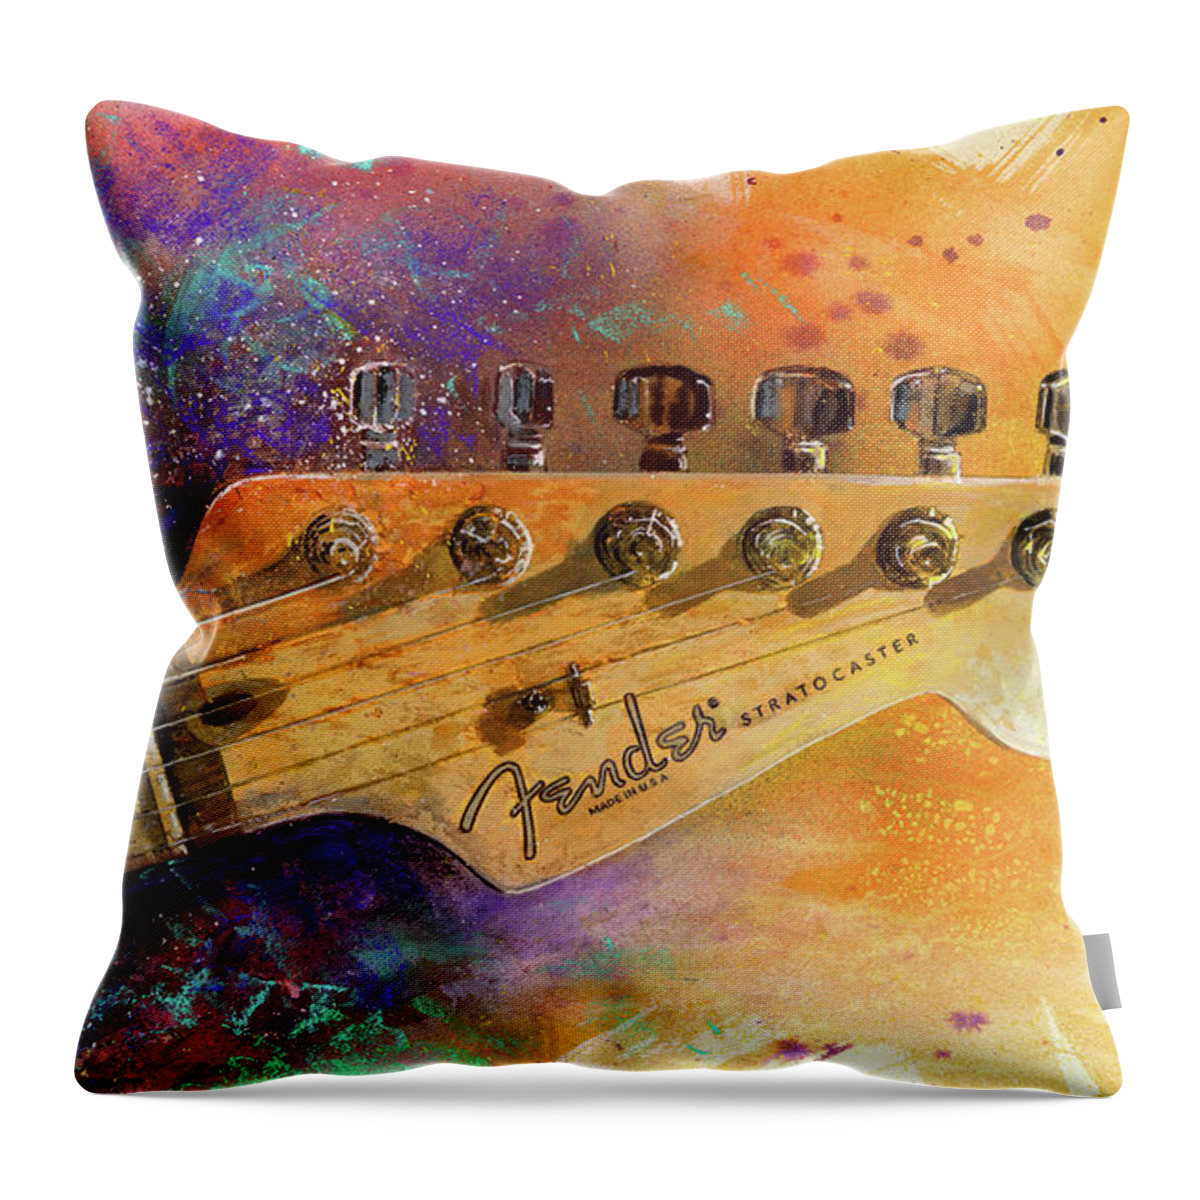 Fender Stratocaster Throw Pillow featuring the painting Fender Head by Andrew King